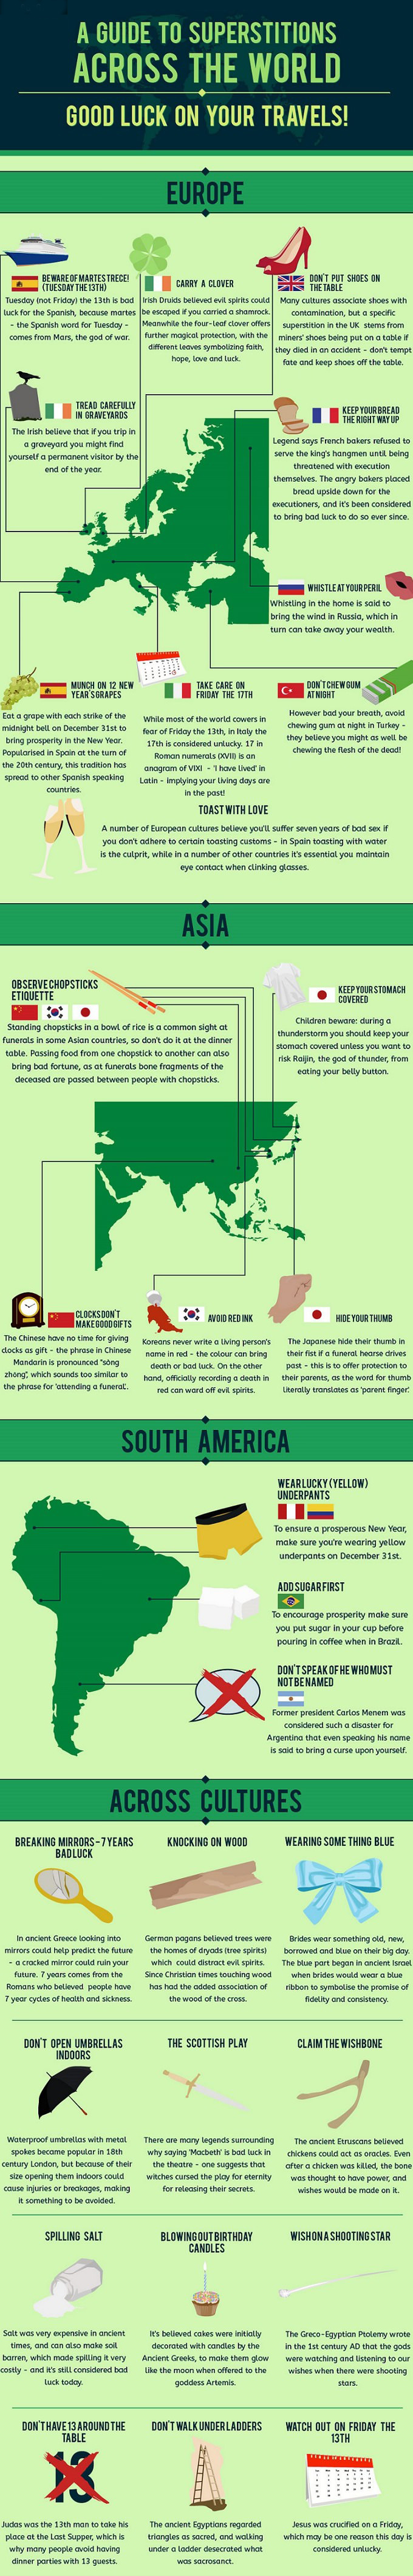 Superstitions From Around The World You've Probably Never Heard Of (infographic)